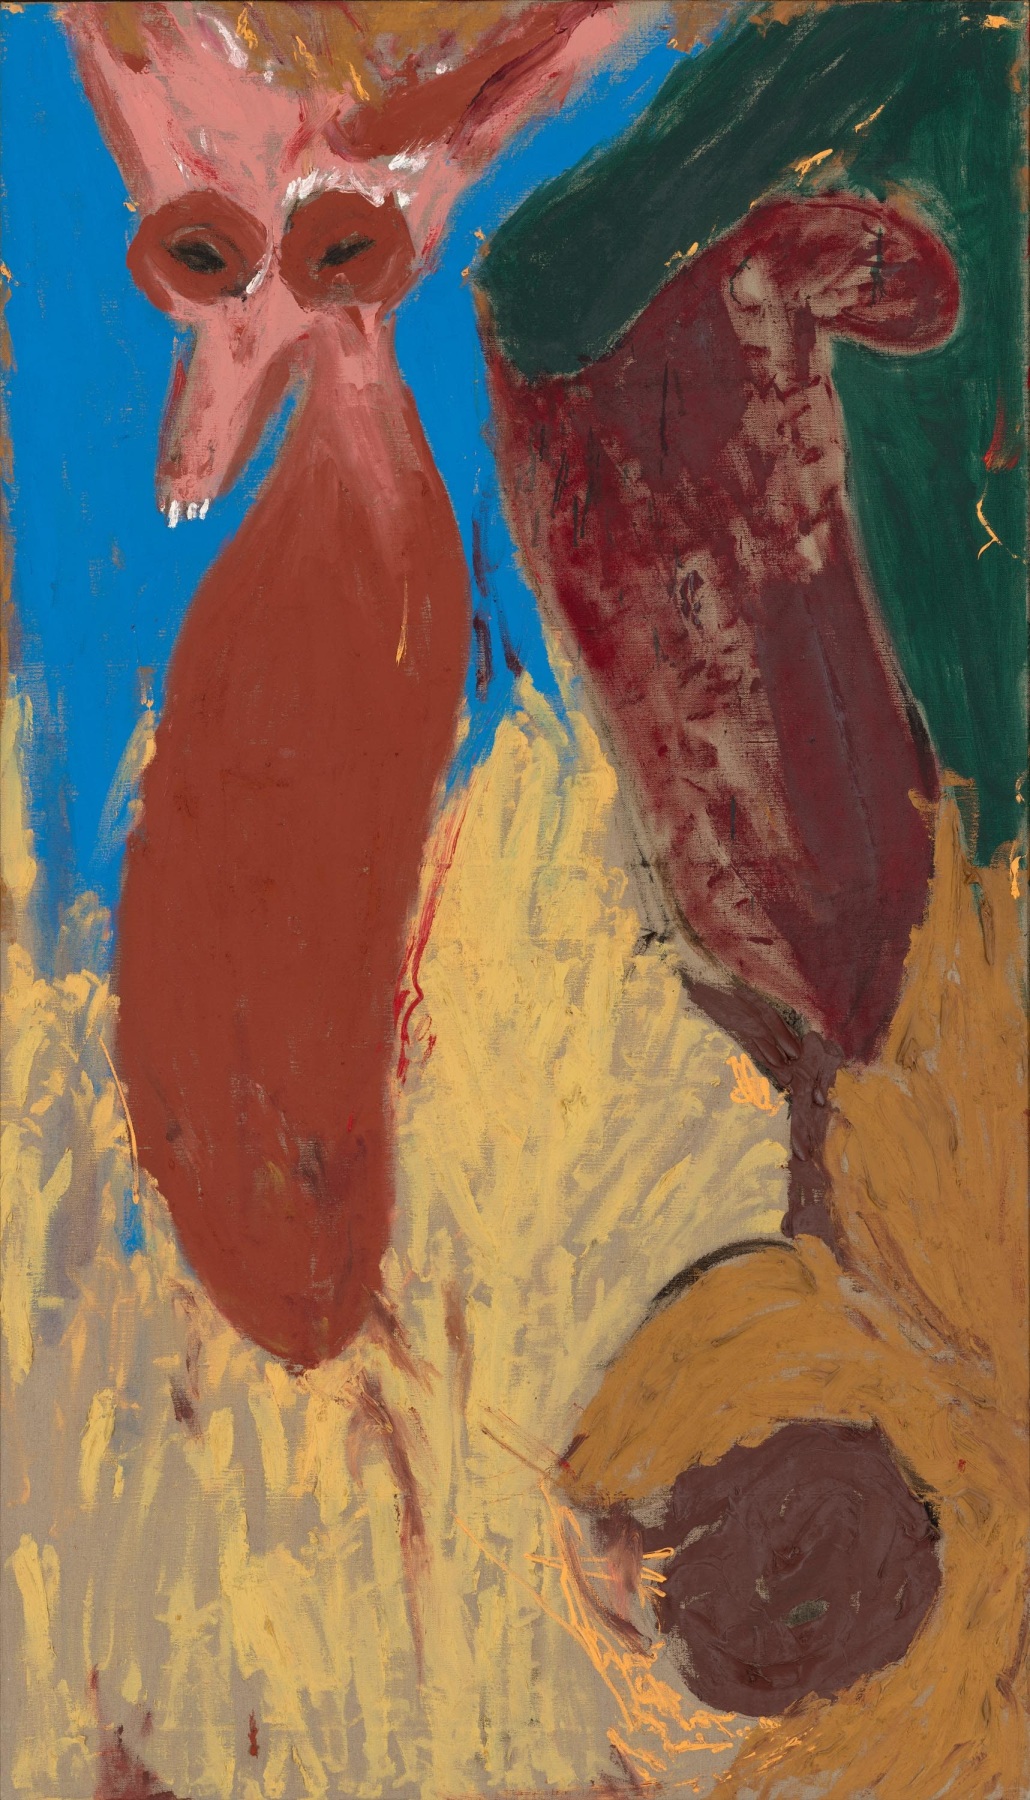 Don Van Vliet

&amp;ldquo;Two Rips in a Haystack&amp;rdquo;, 1985

Oil on canvas

84 x 48 inches

213.5 x 122 cm

VLI 25/G